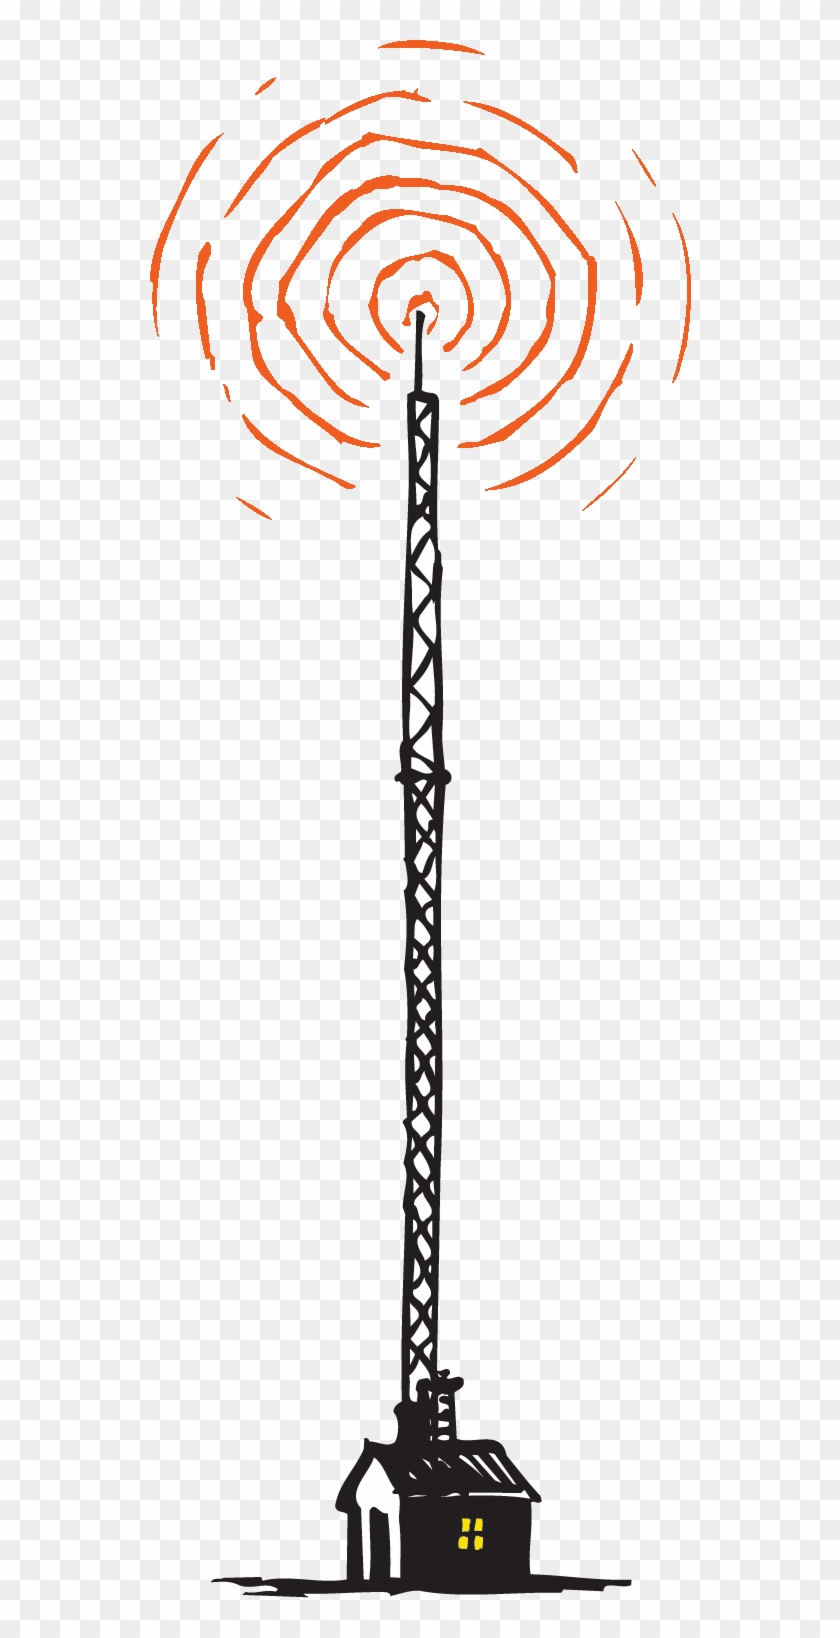 Color Version Radio Tower - Radio Station Tower Png Clipart #1340072